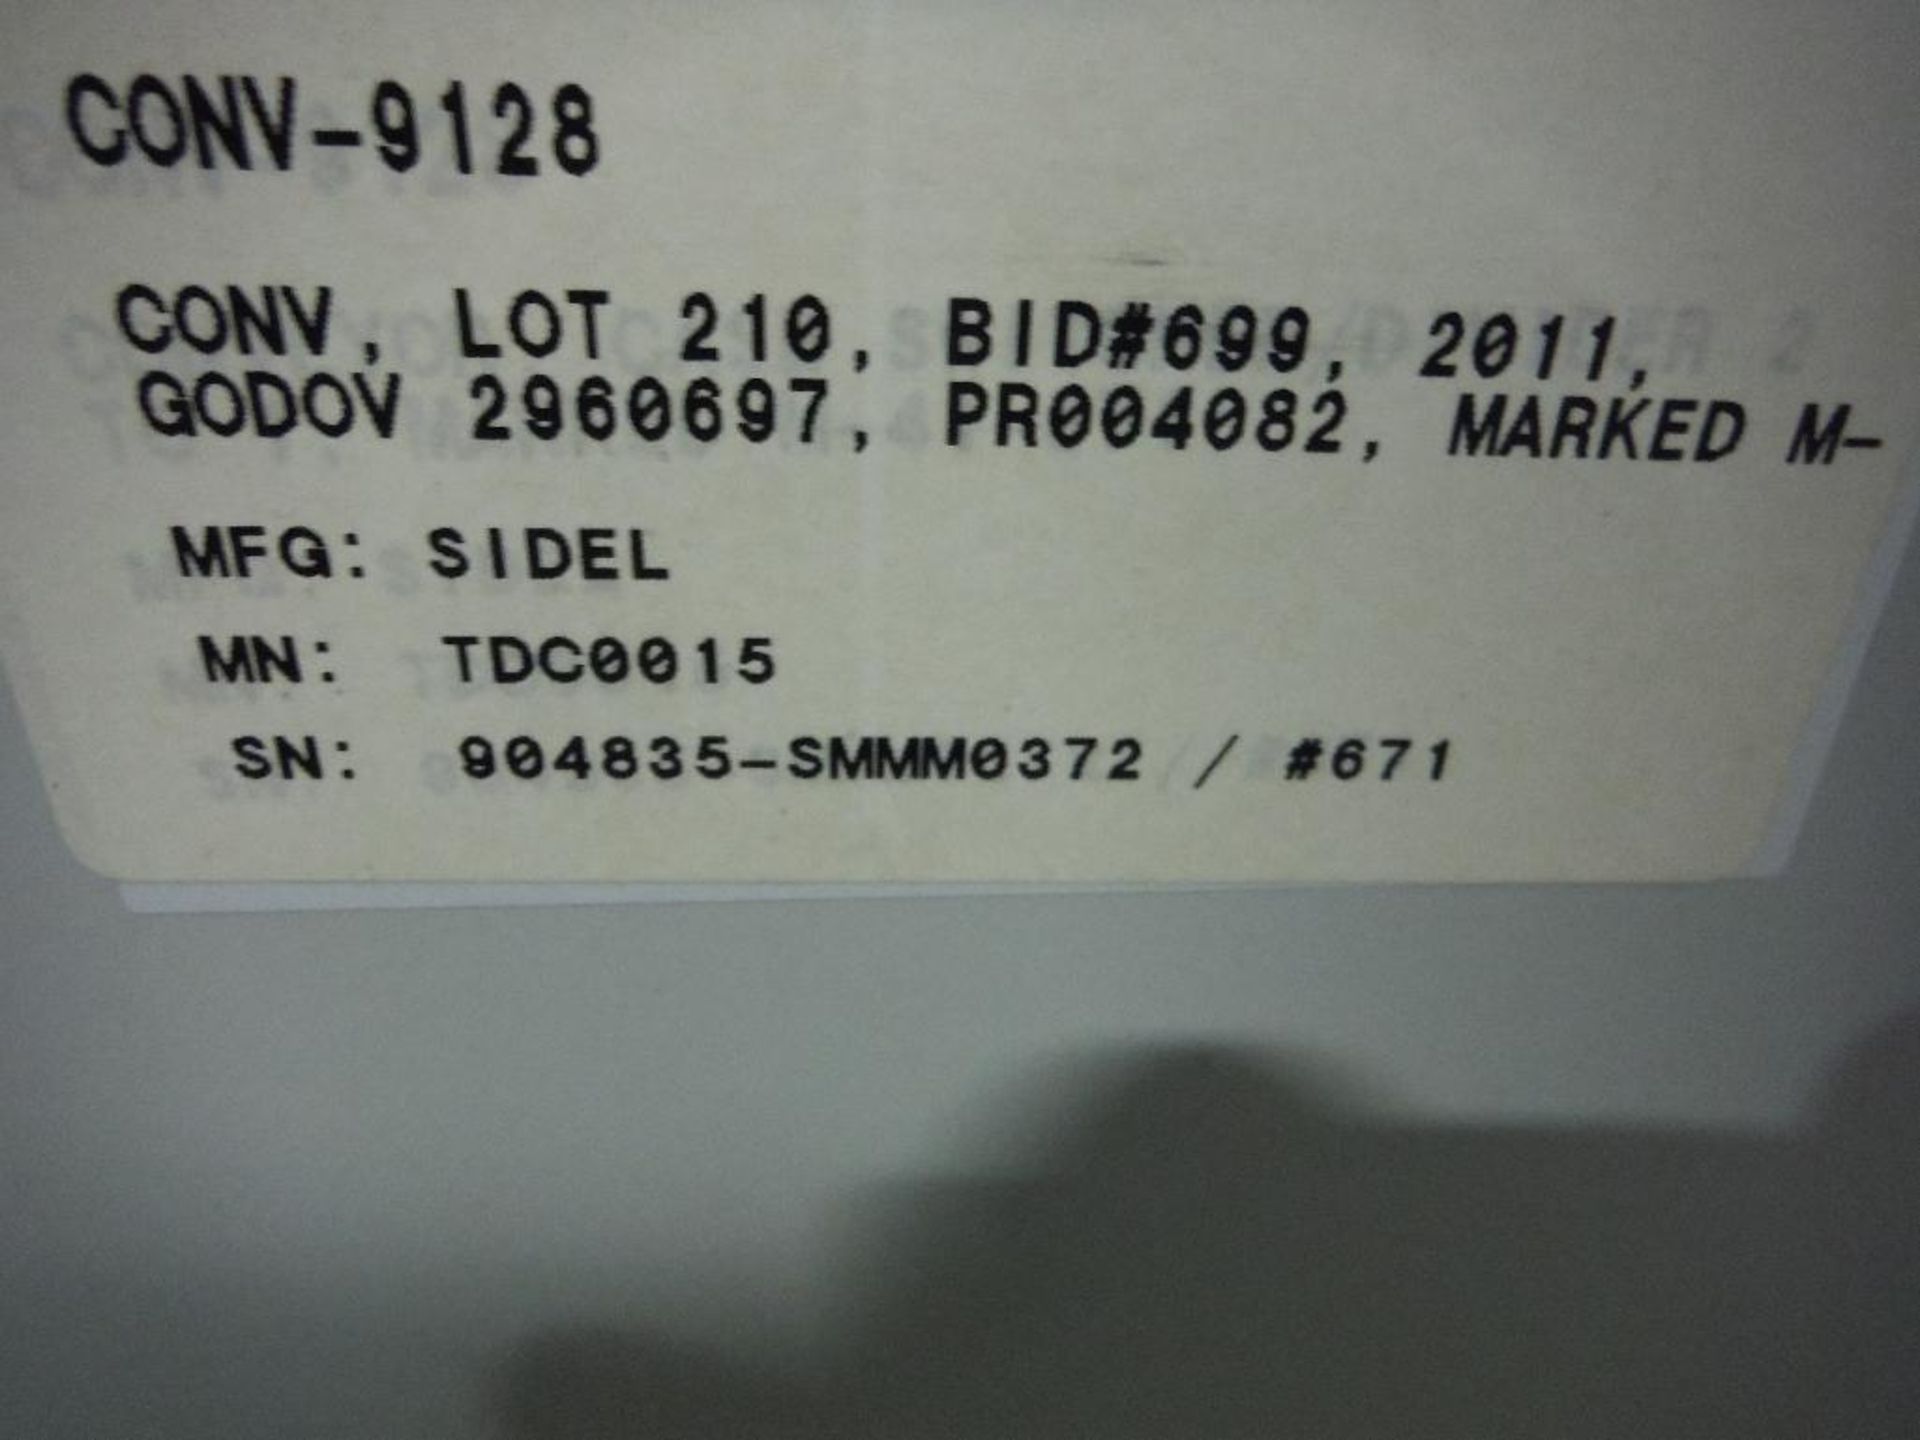 2007 Sidel combiner conveyor, Model TDC0015, SN 904835-SMMM0327, 98 in. long x 66 in. wide, with con - Bild 9 aus 9